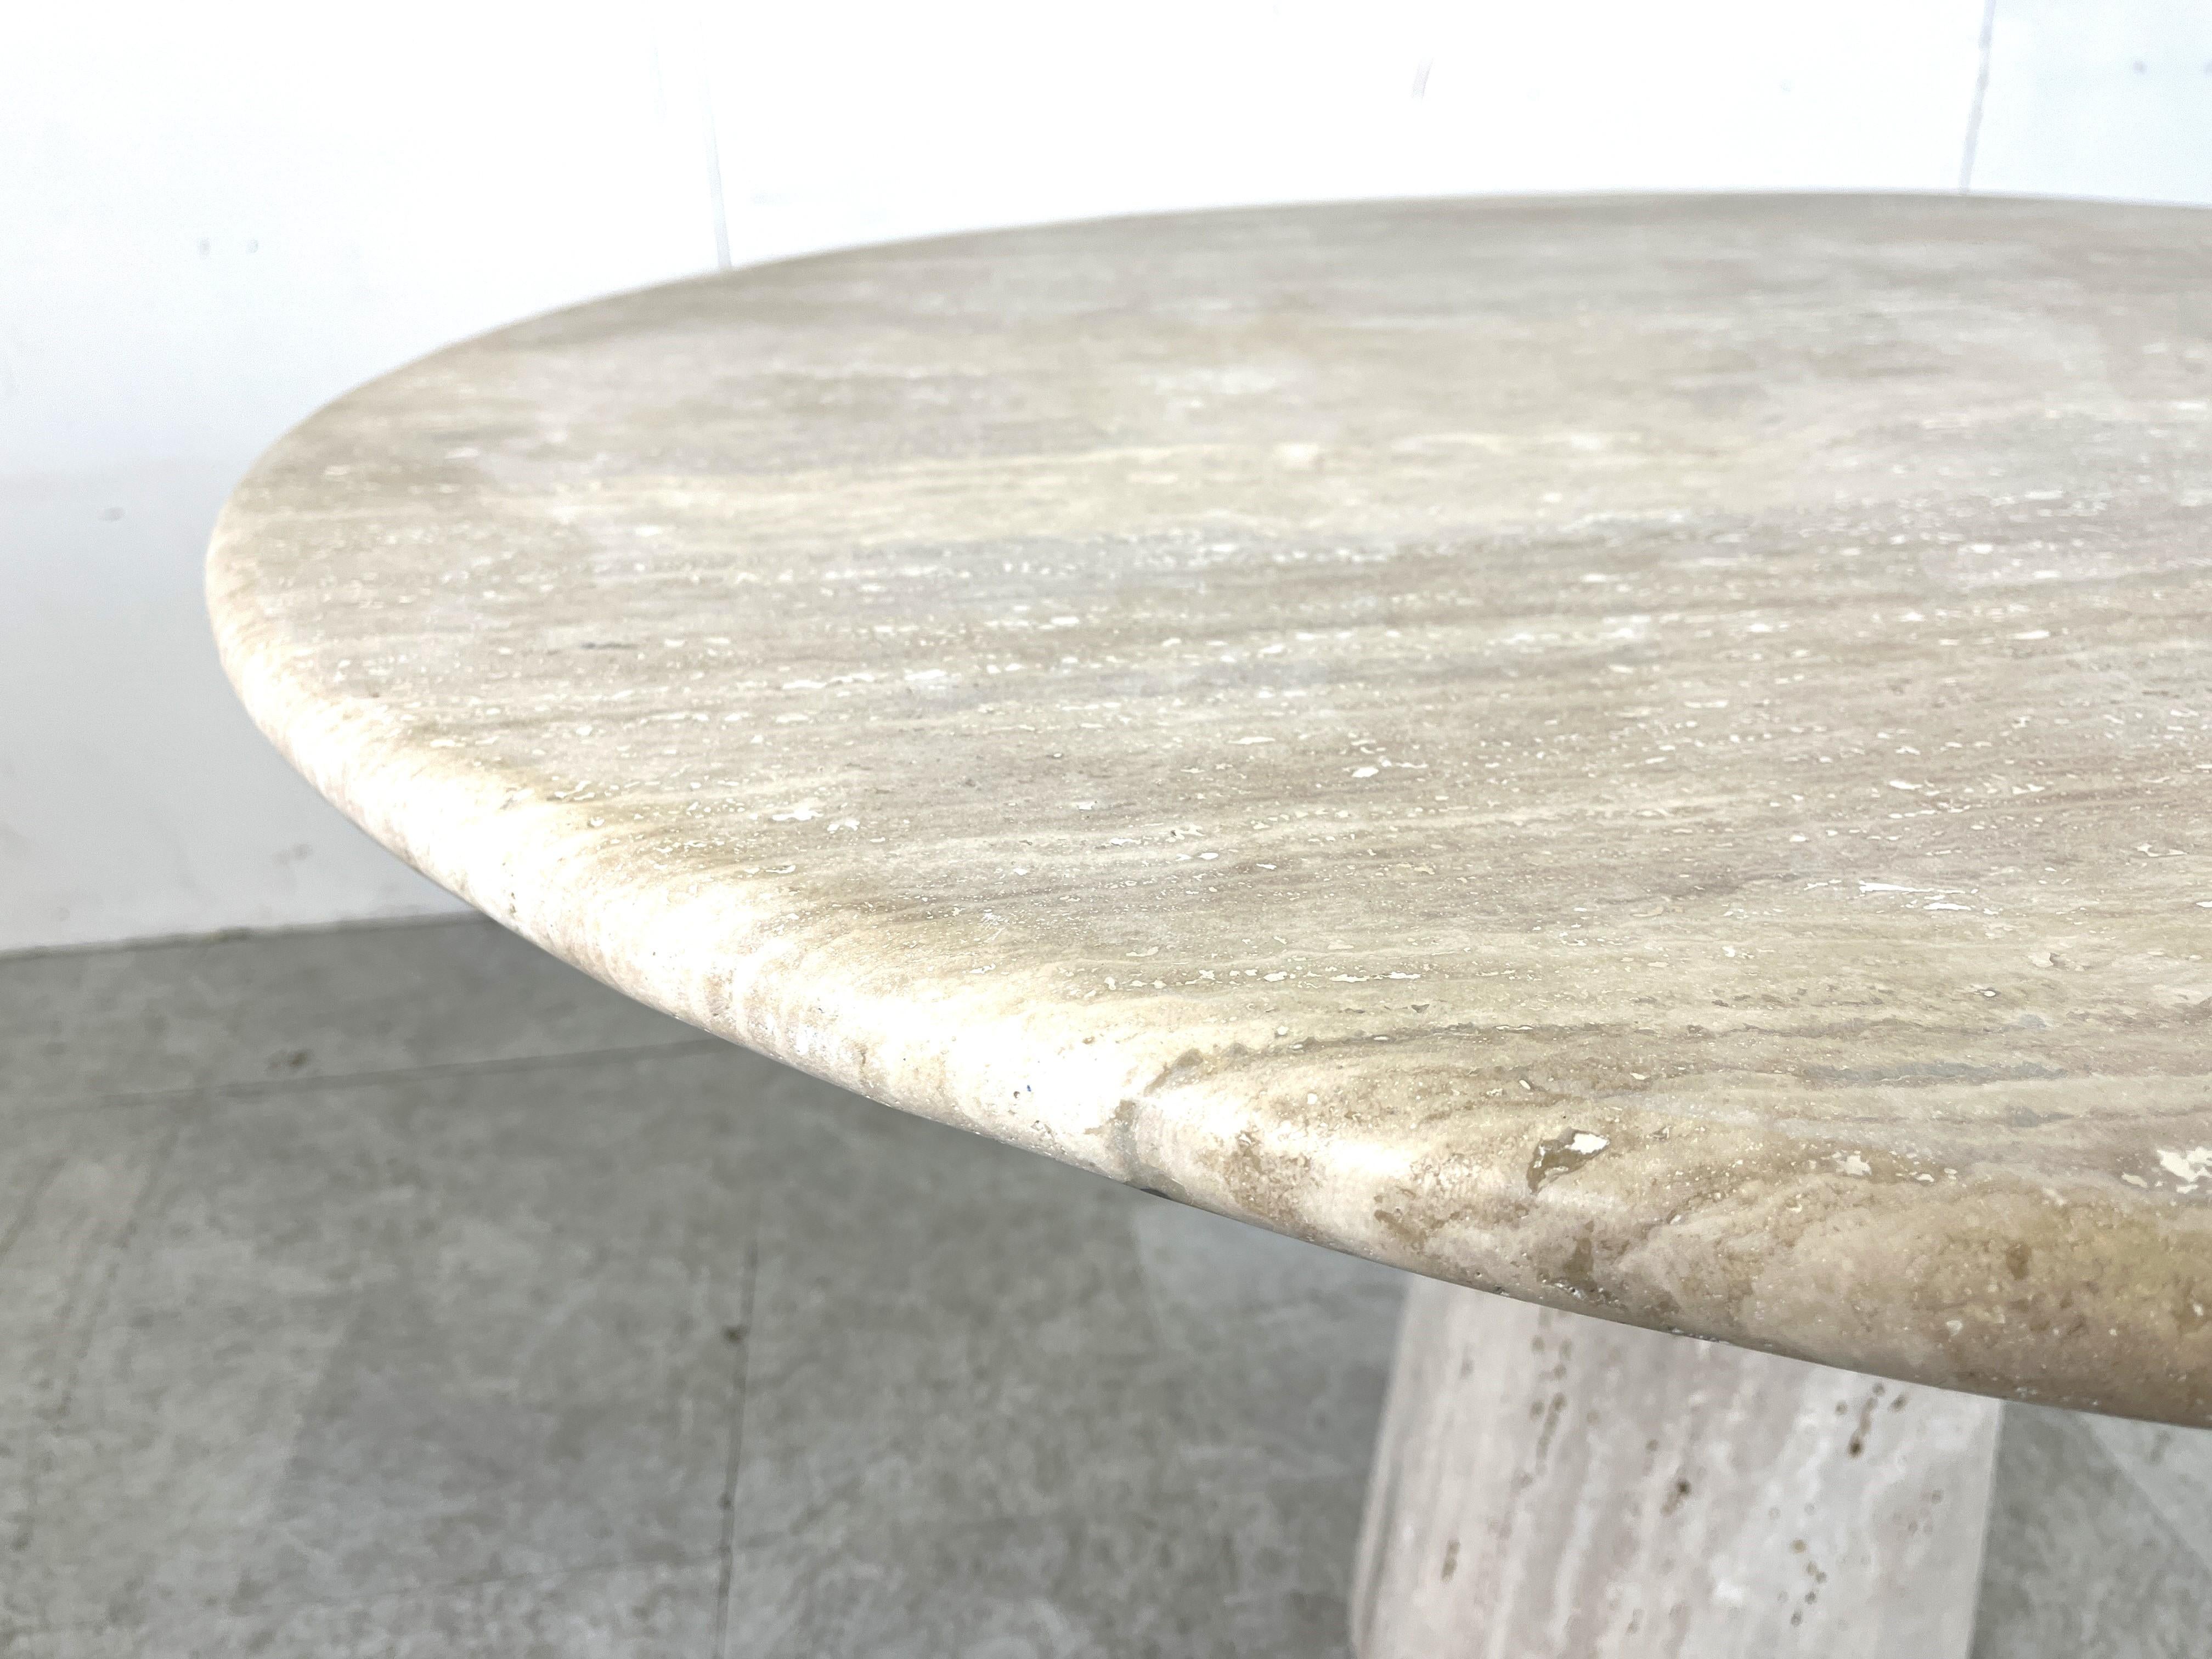 Timeless and beautiful travertine dining table very much in the style of Angelo Mangiarotti's tables.

Beautiful conical central leg with a round top.

Untouched travertine which looks very 'brut' and very attractive.

The table top is very stable